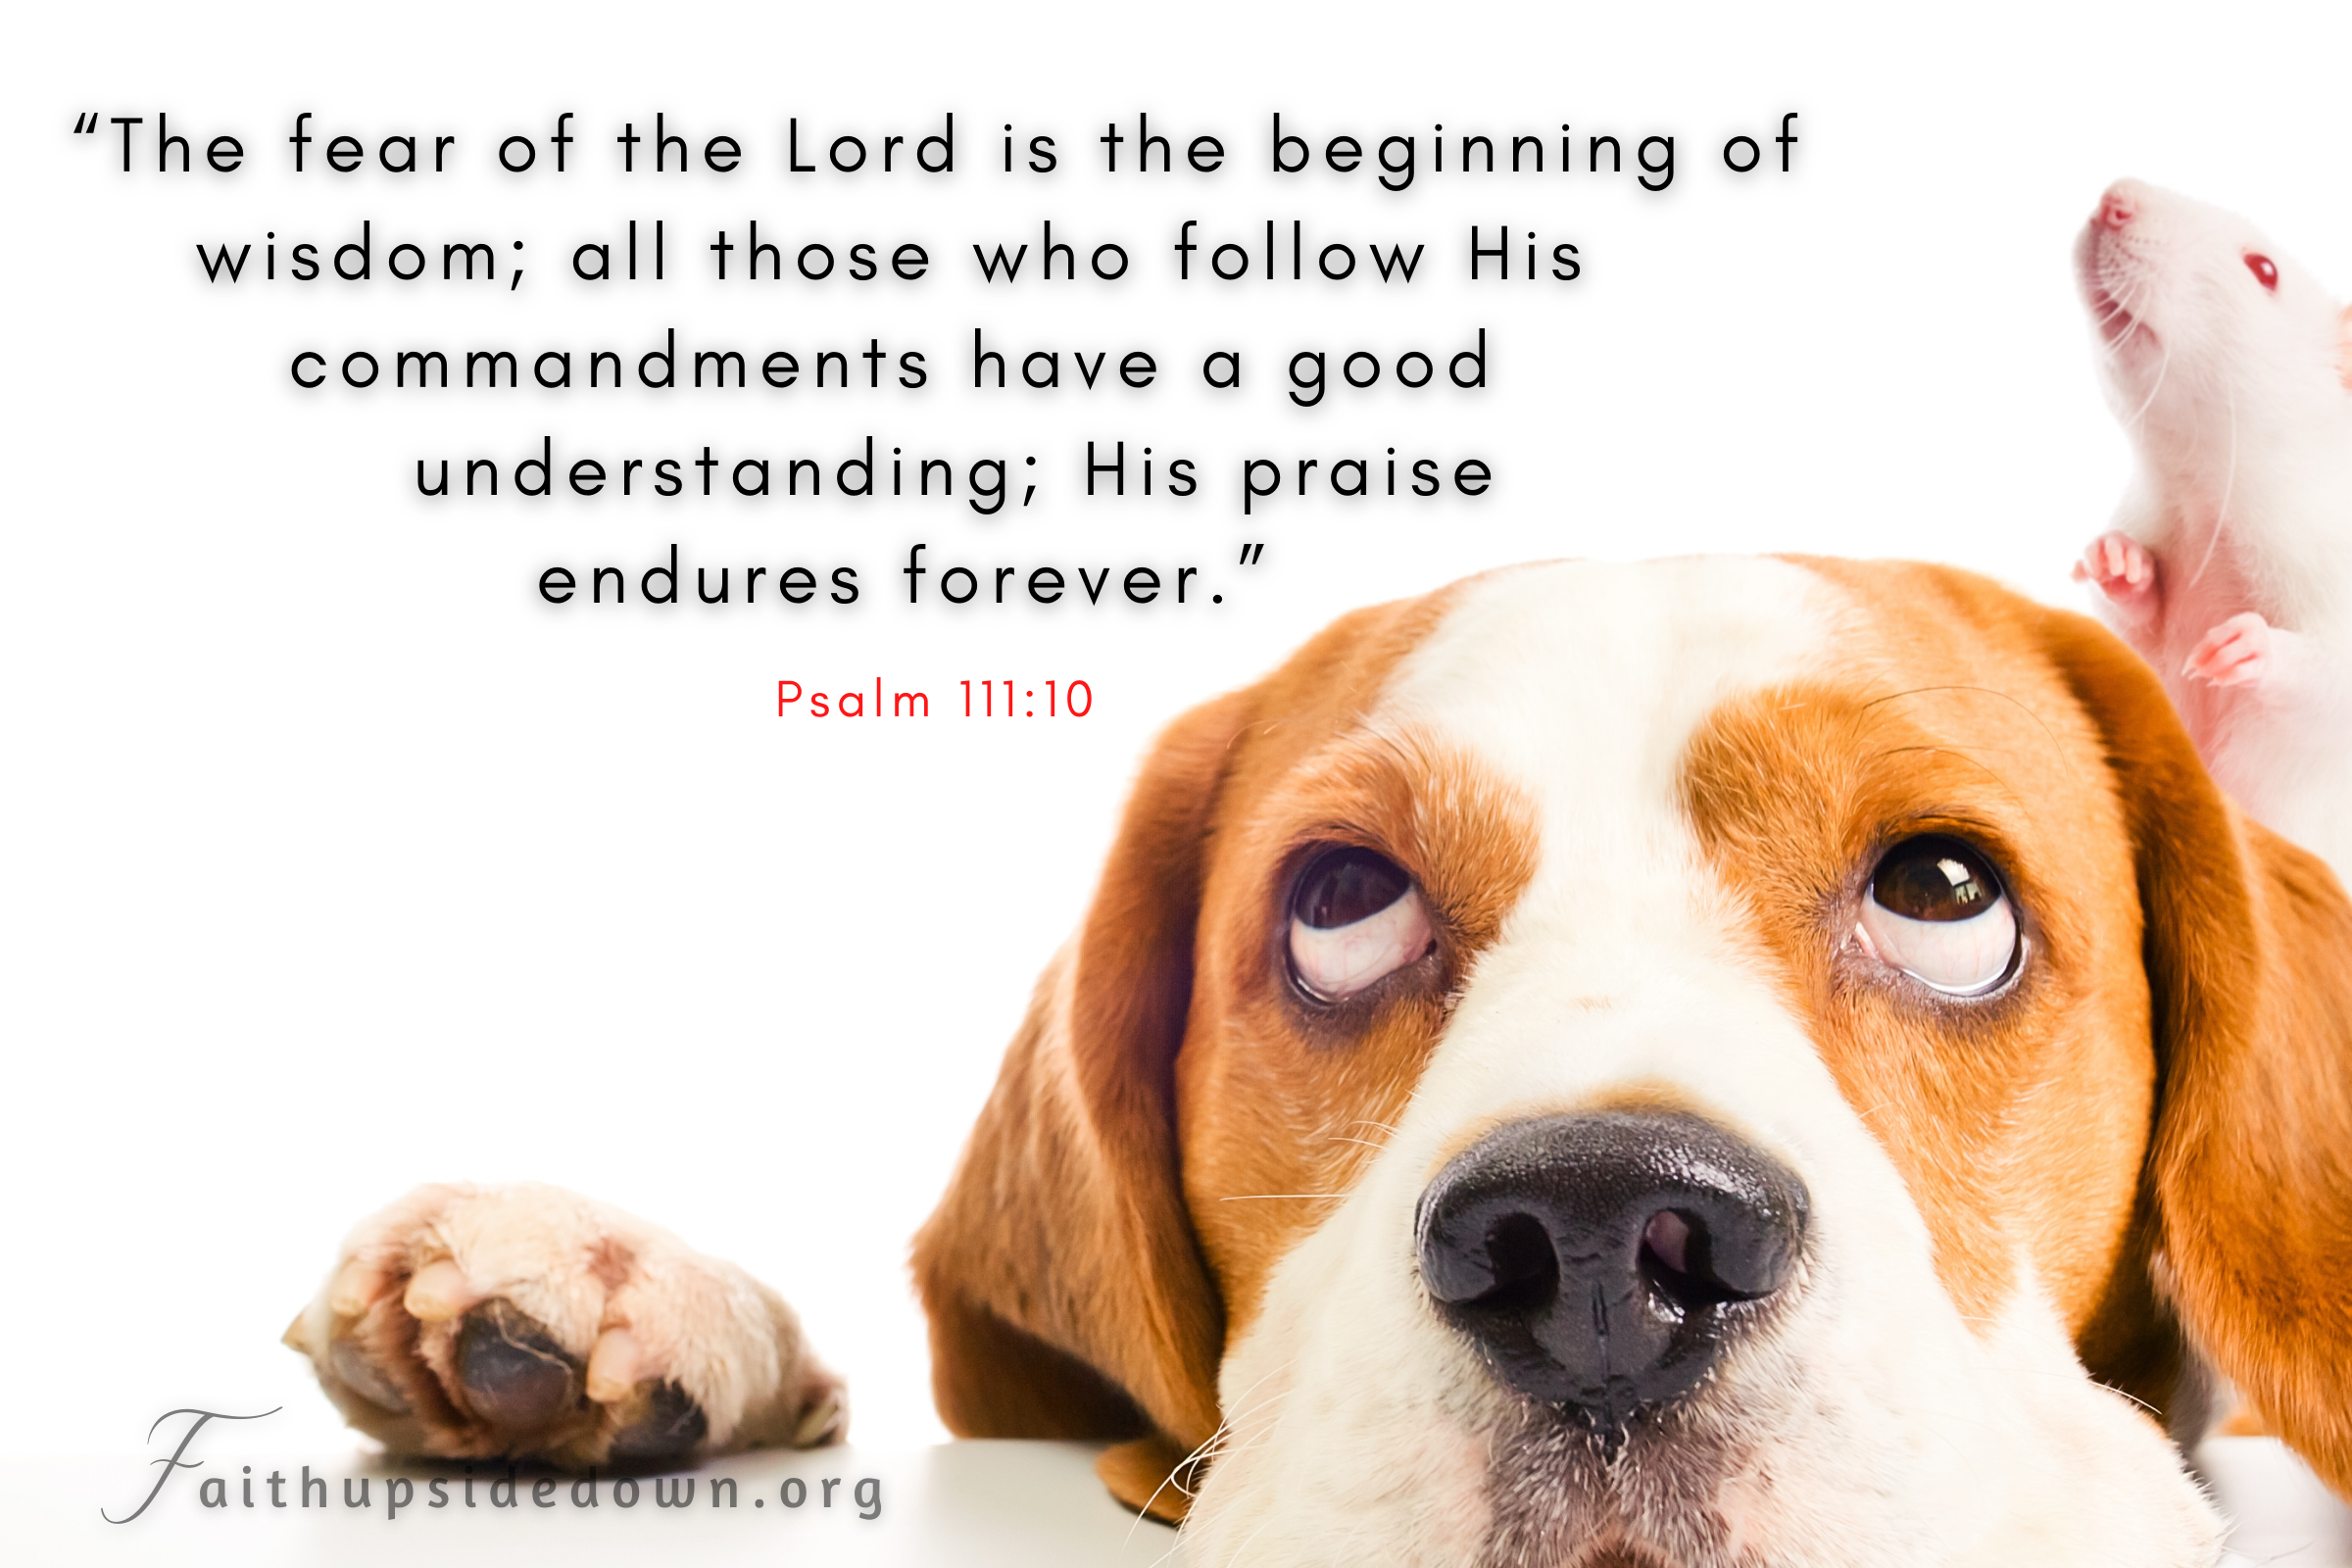 A puppy with mouse on his back, both looking upward with the Scripture verse Psalm 111:10